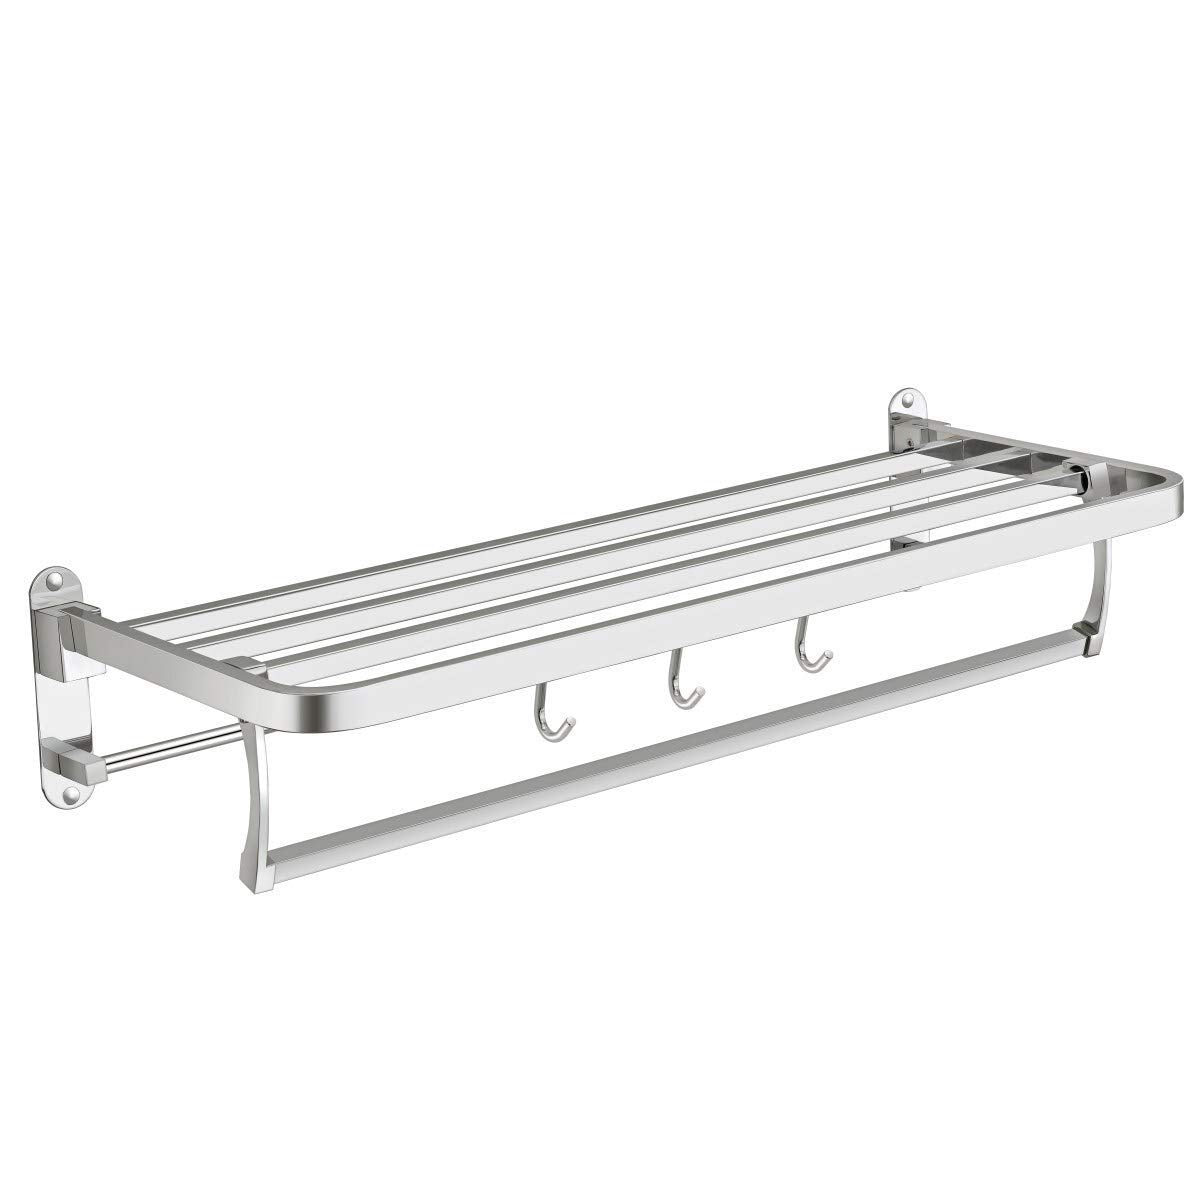 Plantex New Look Stainless Steel Folding Towel Rack for Bathroom / Towel Stand / Hanger / Bathroom Accessories (24 Inch-Chrome)